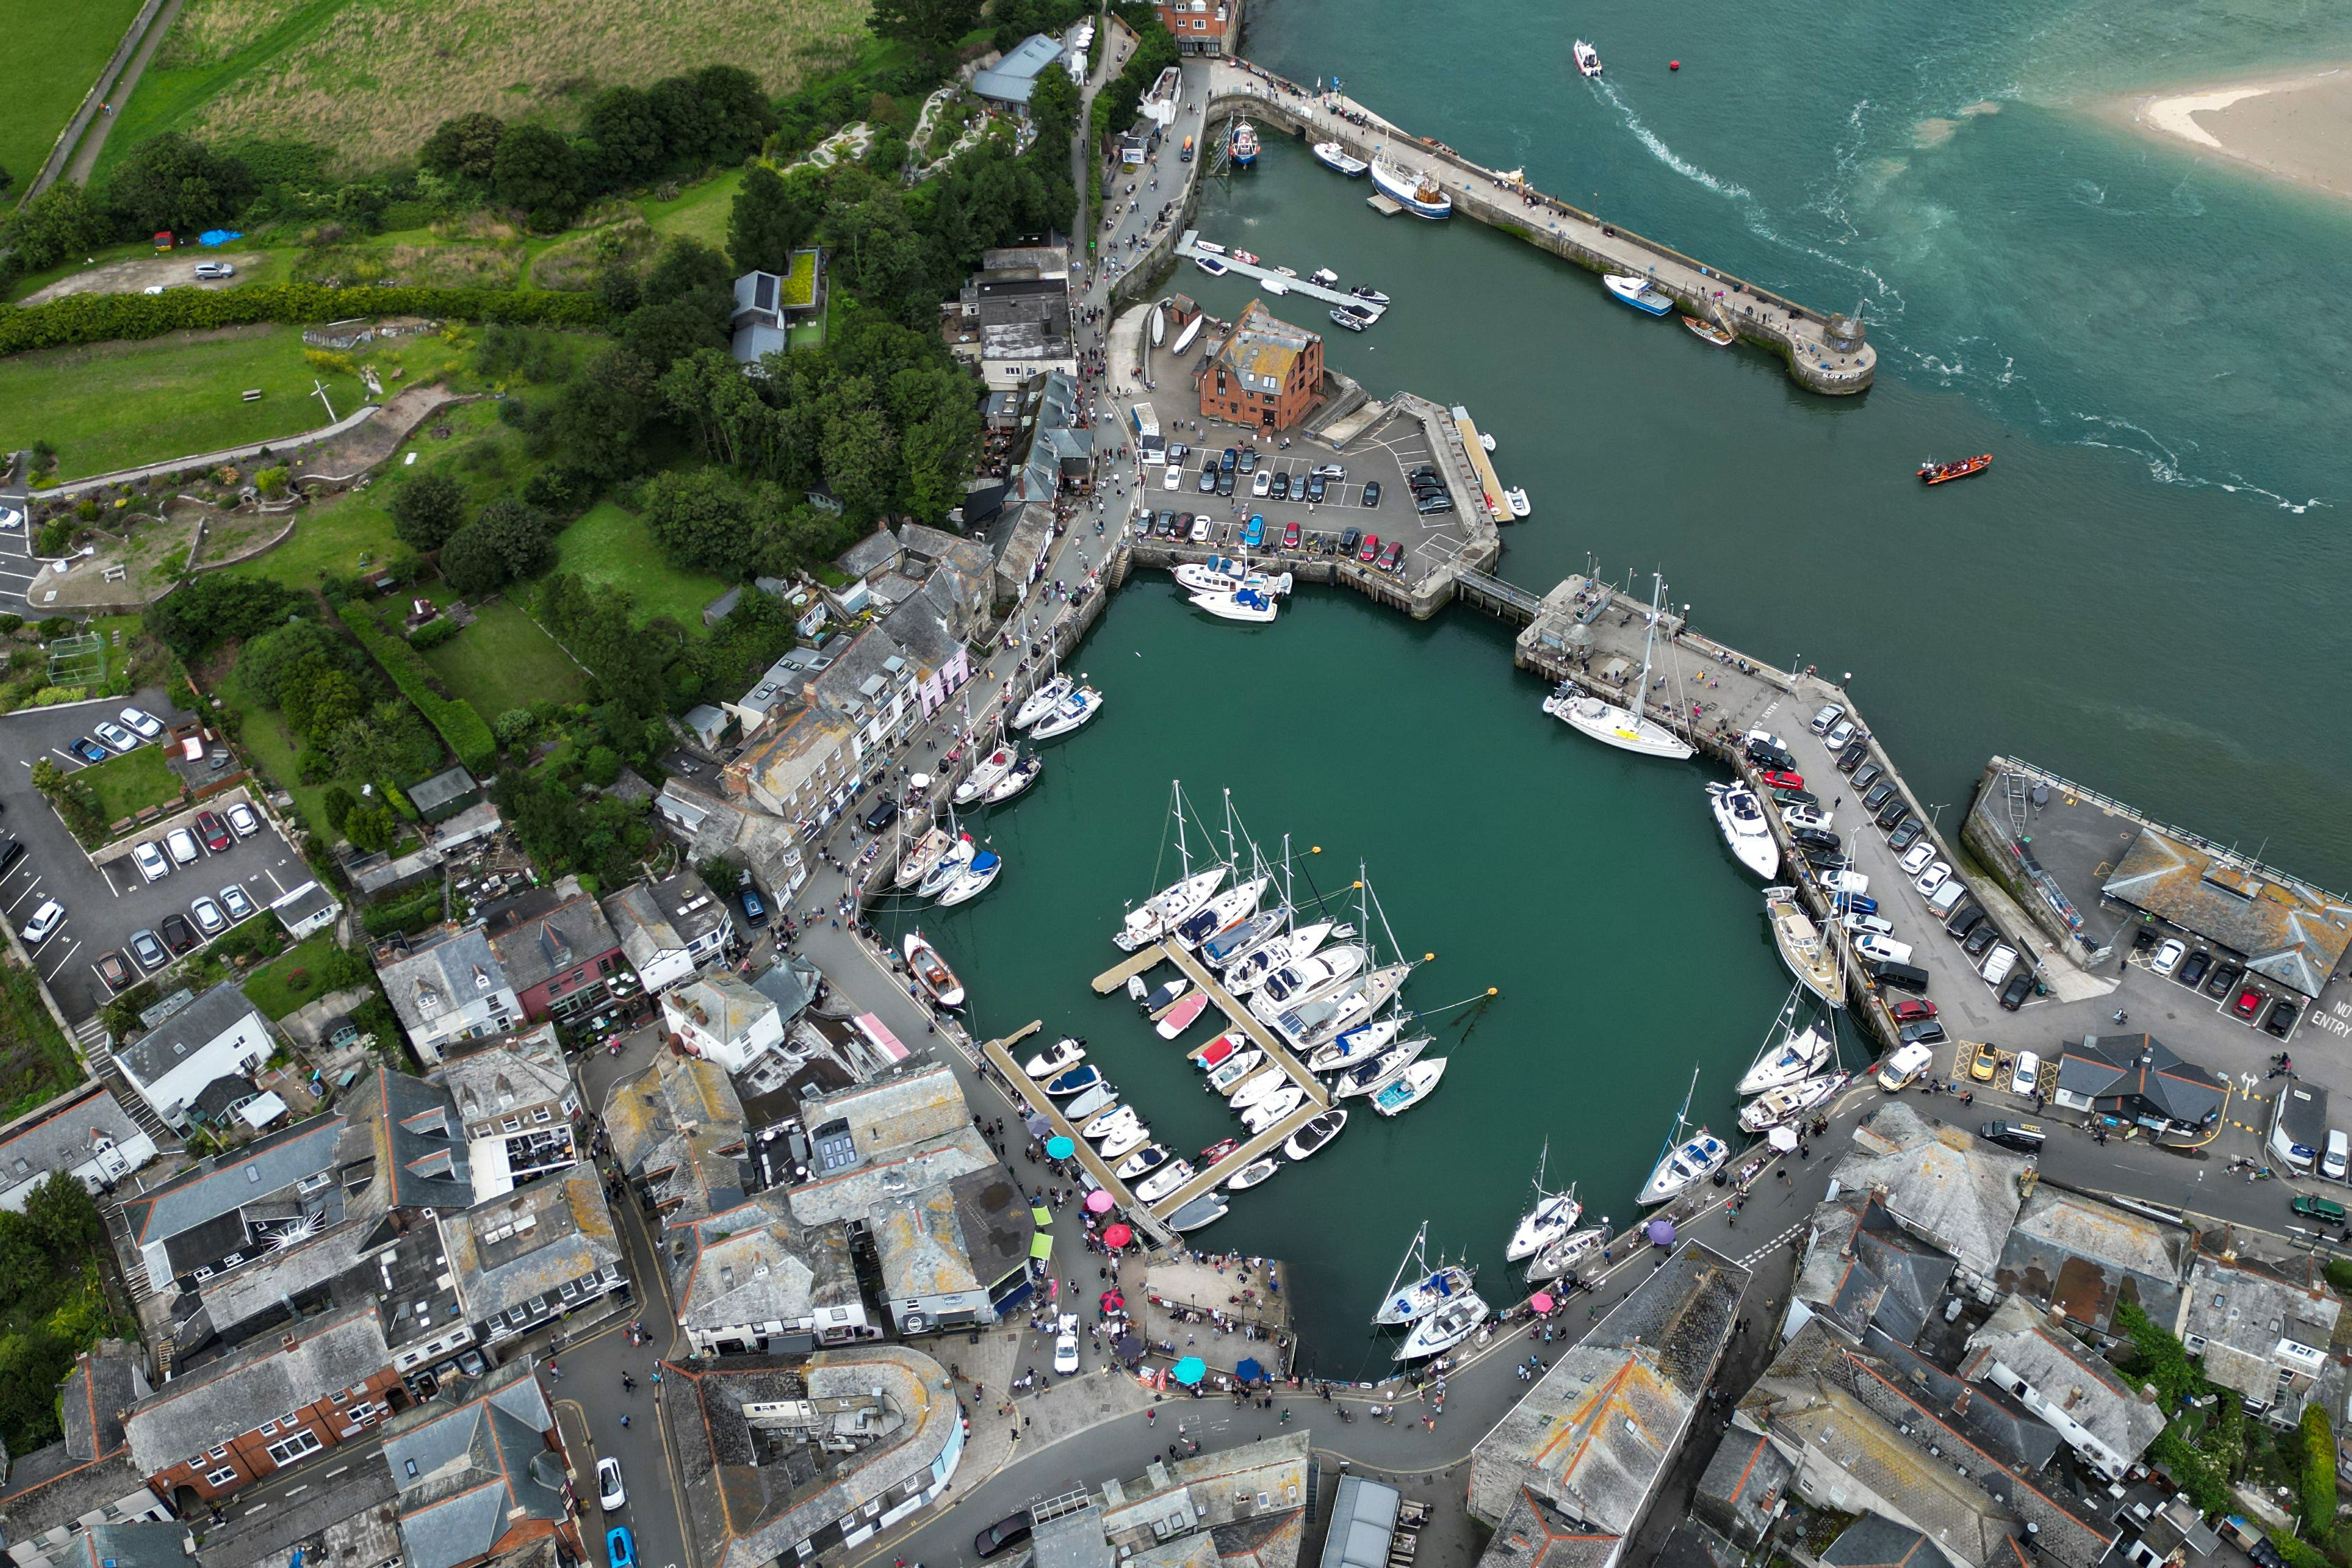 Padstow is a magnet for tourism in Cornwall